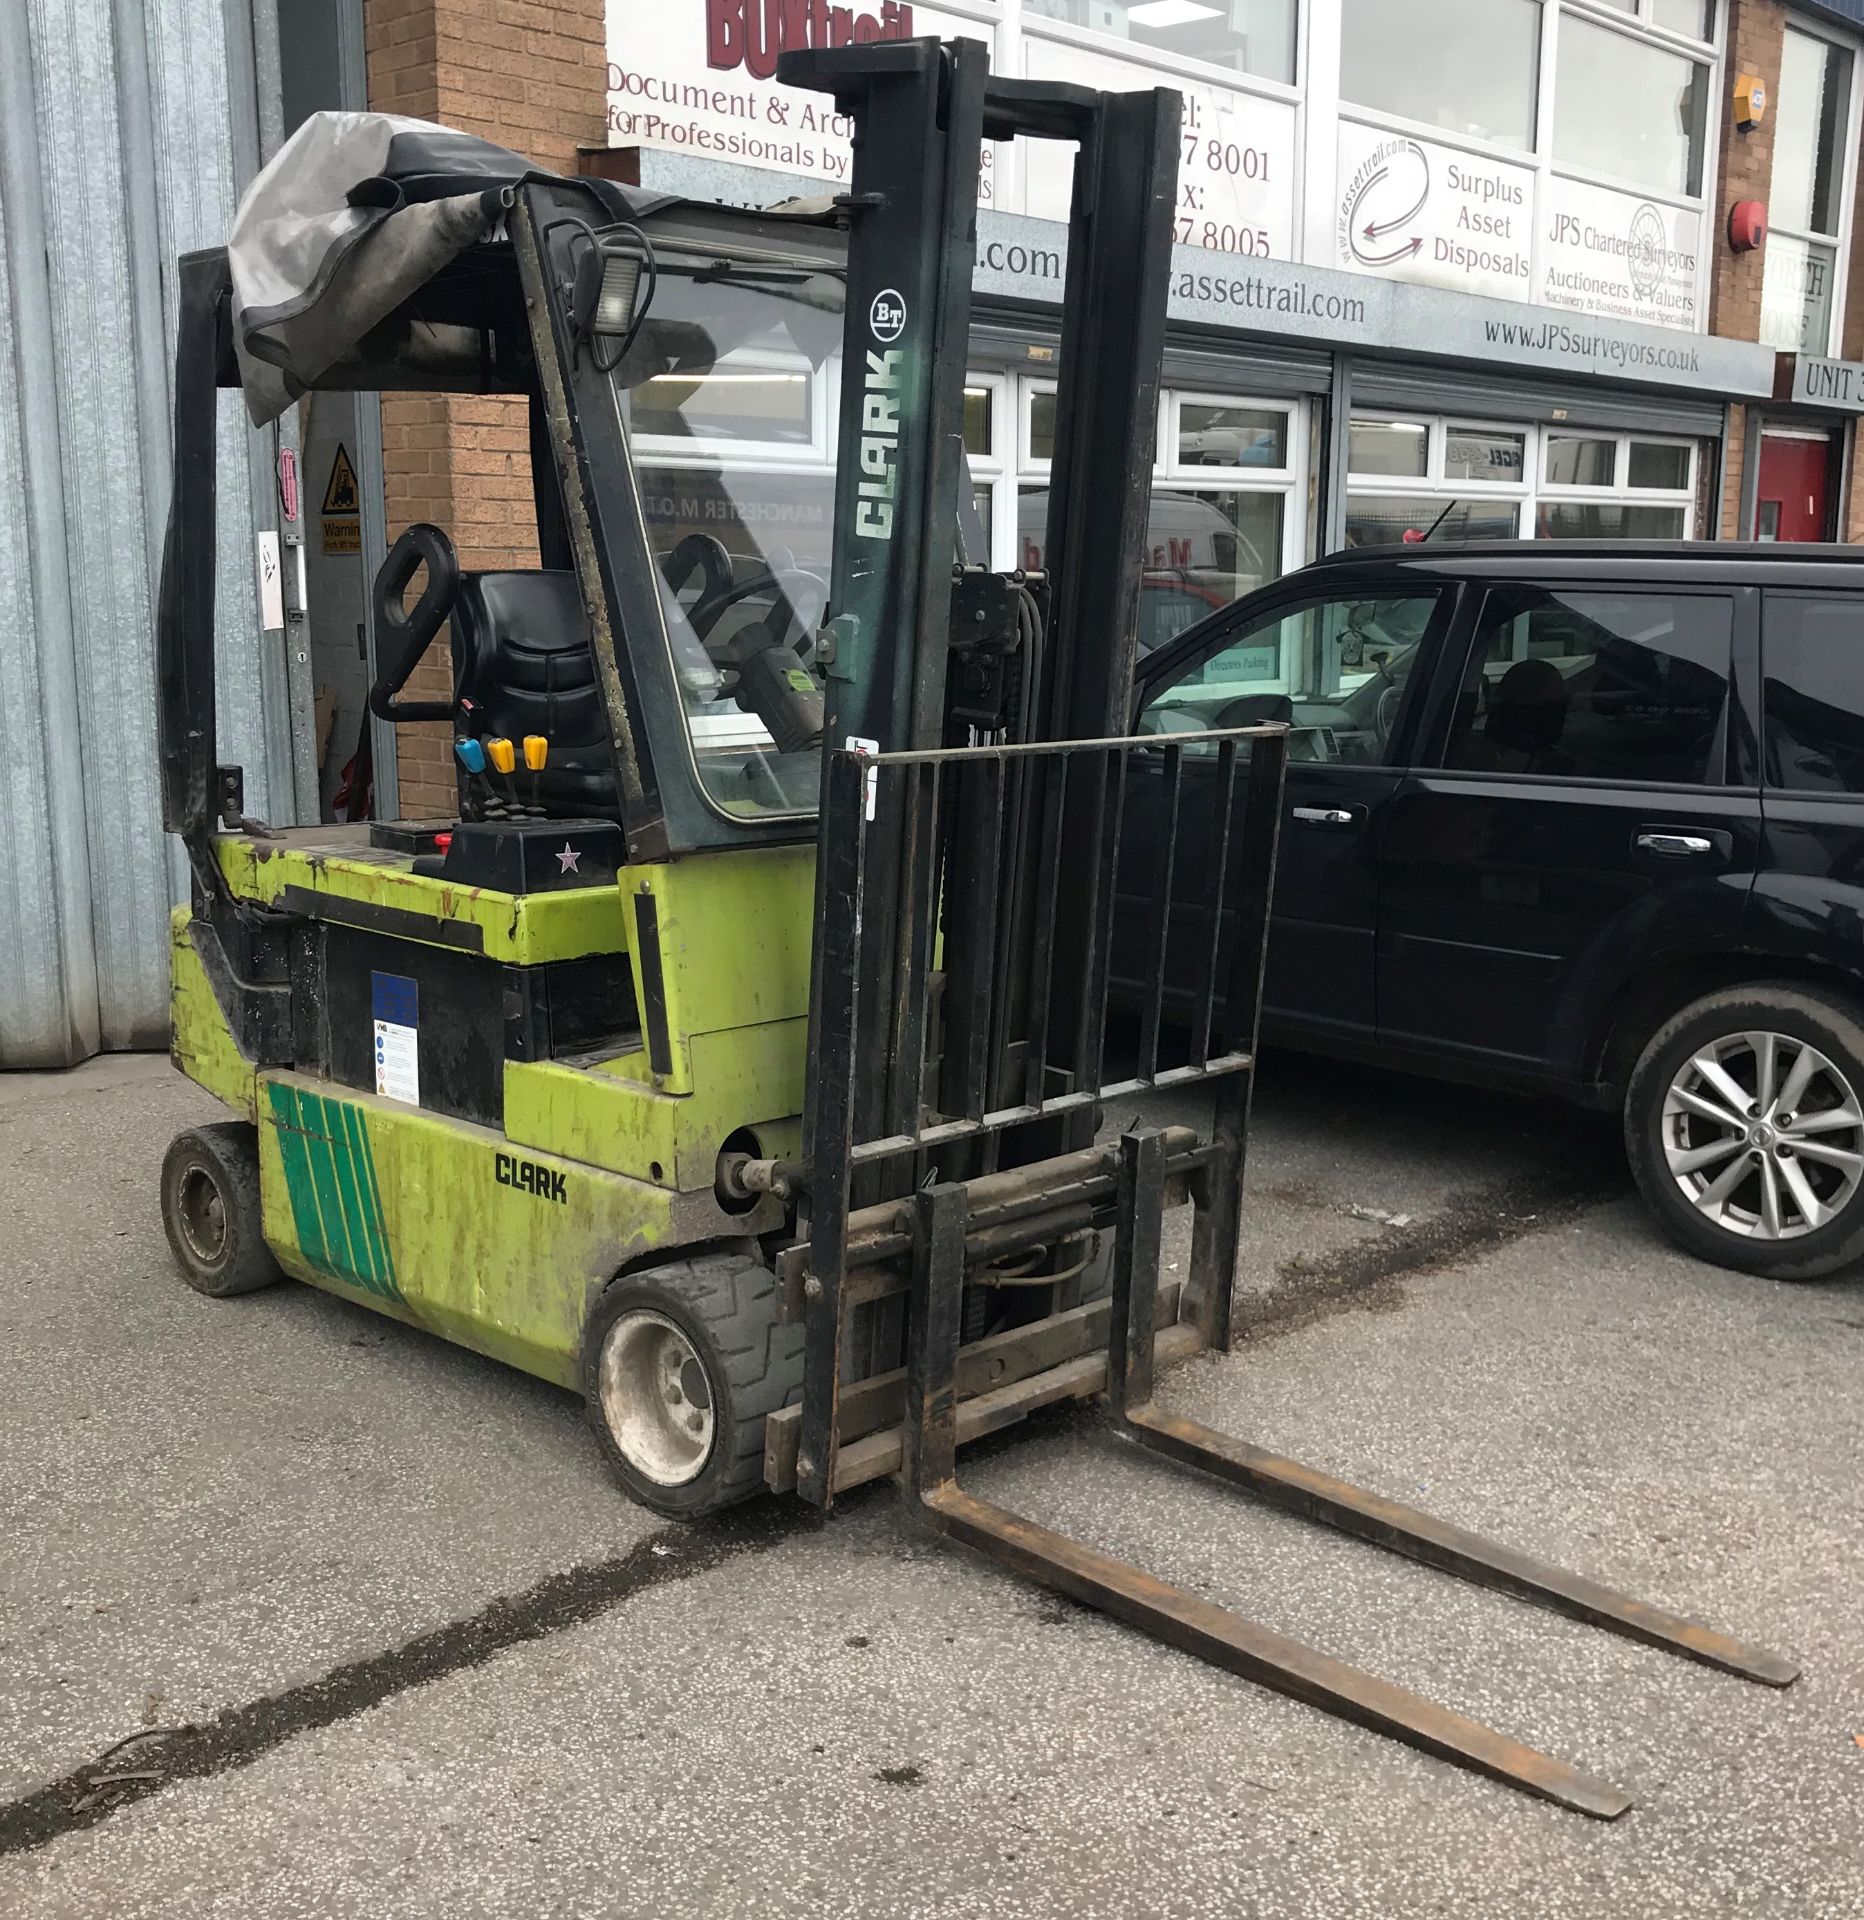 Clark CEM20SX Electric Forklift Truck | YOM: 1999 | Hours: 2374.1 w/ Charger - Image 2 of 9